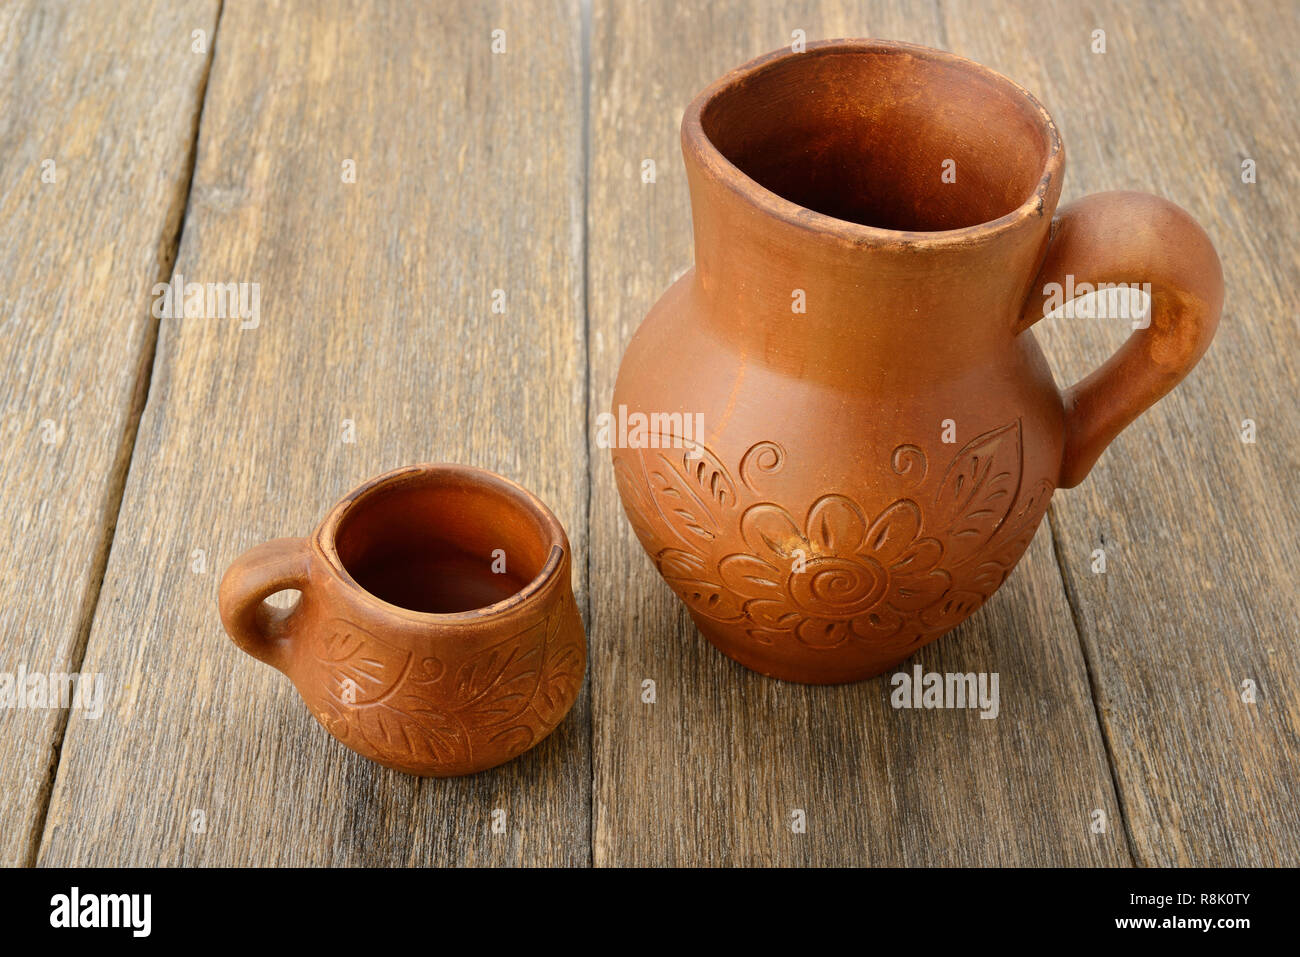 crock and a cup on a wooden surface Stock Photo